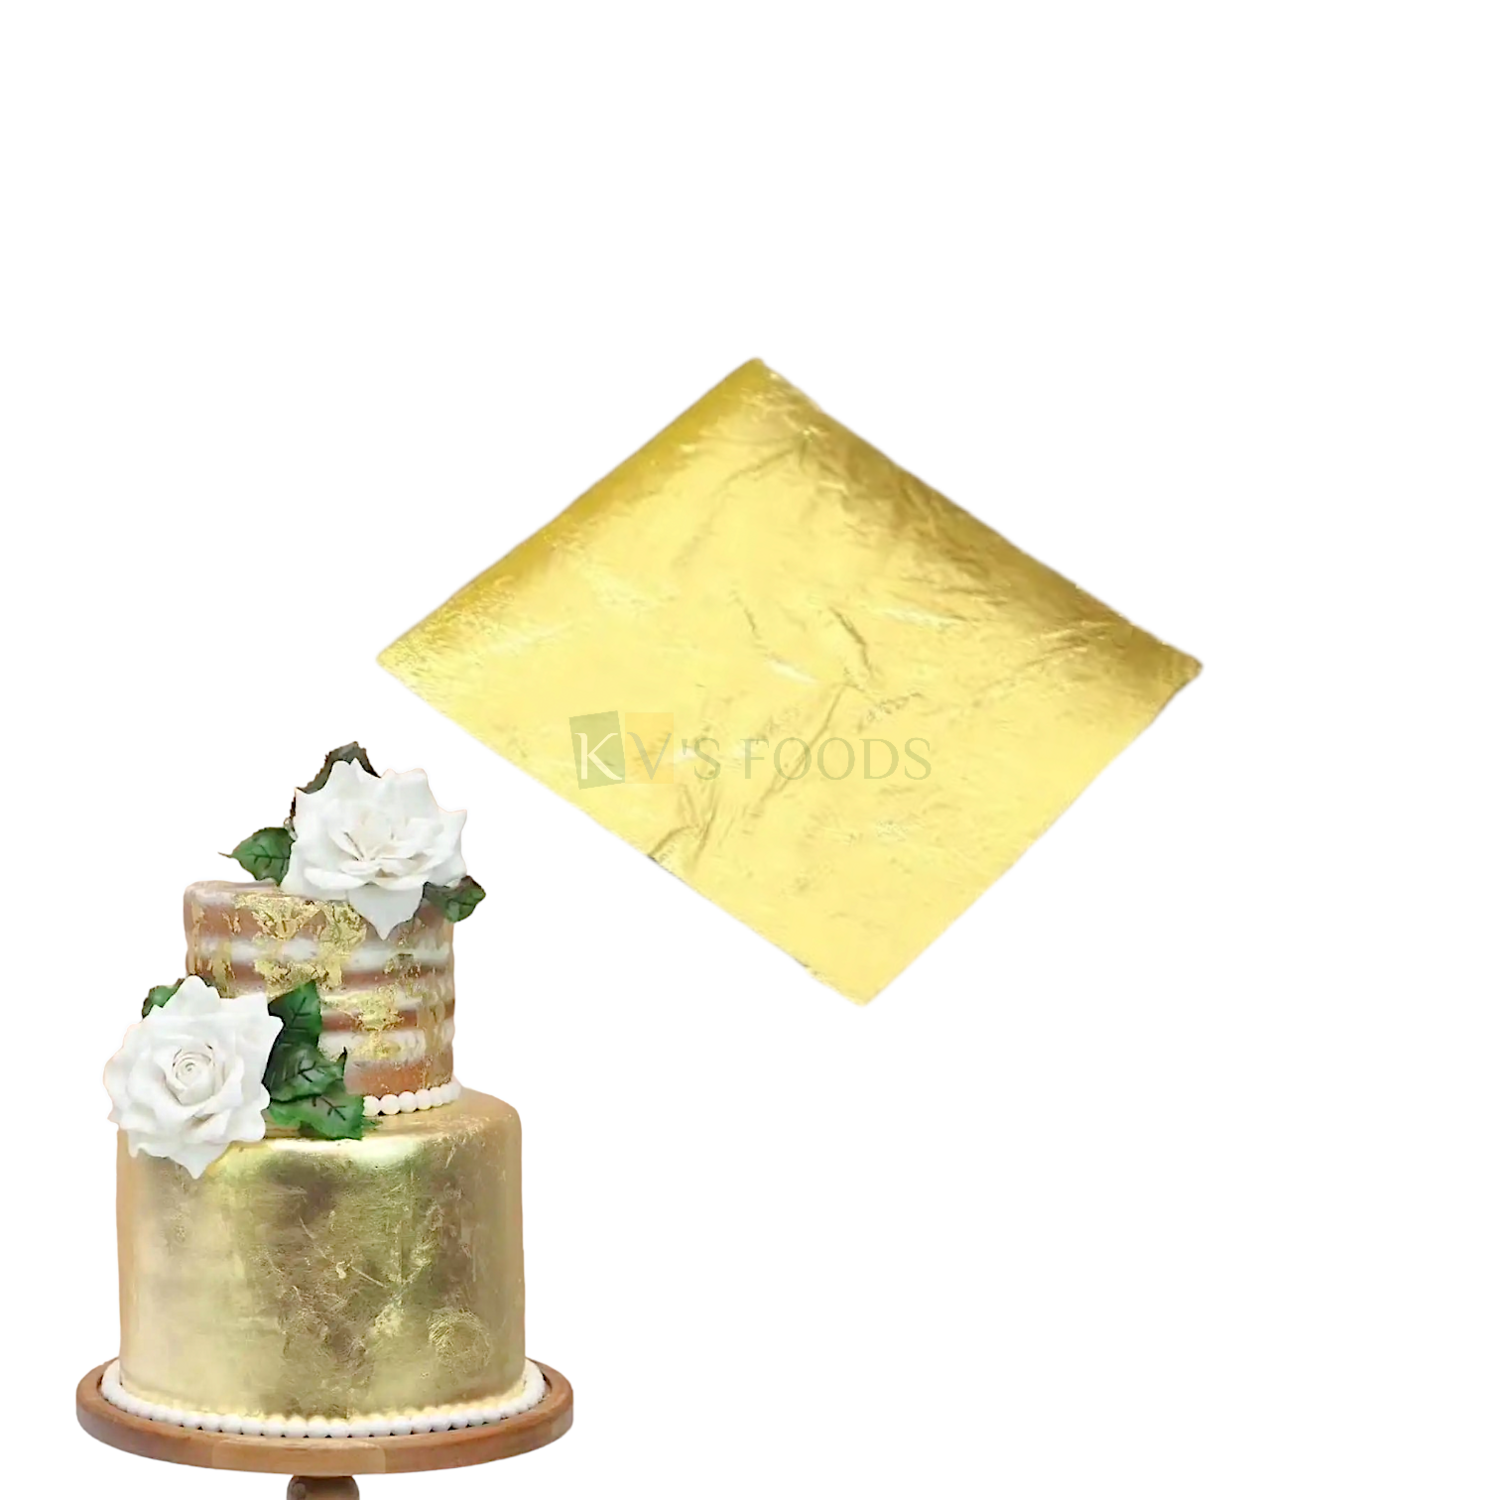 1 PC Gold Edible Leaves for Cakes, Sweets Golden Vark for Cake Decorations, Chocolates, Desserts, Birthday Cakes, Wedding Anniversary Cakes, Engagement, Love, Valentine Theme Cakes